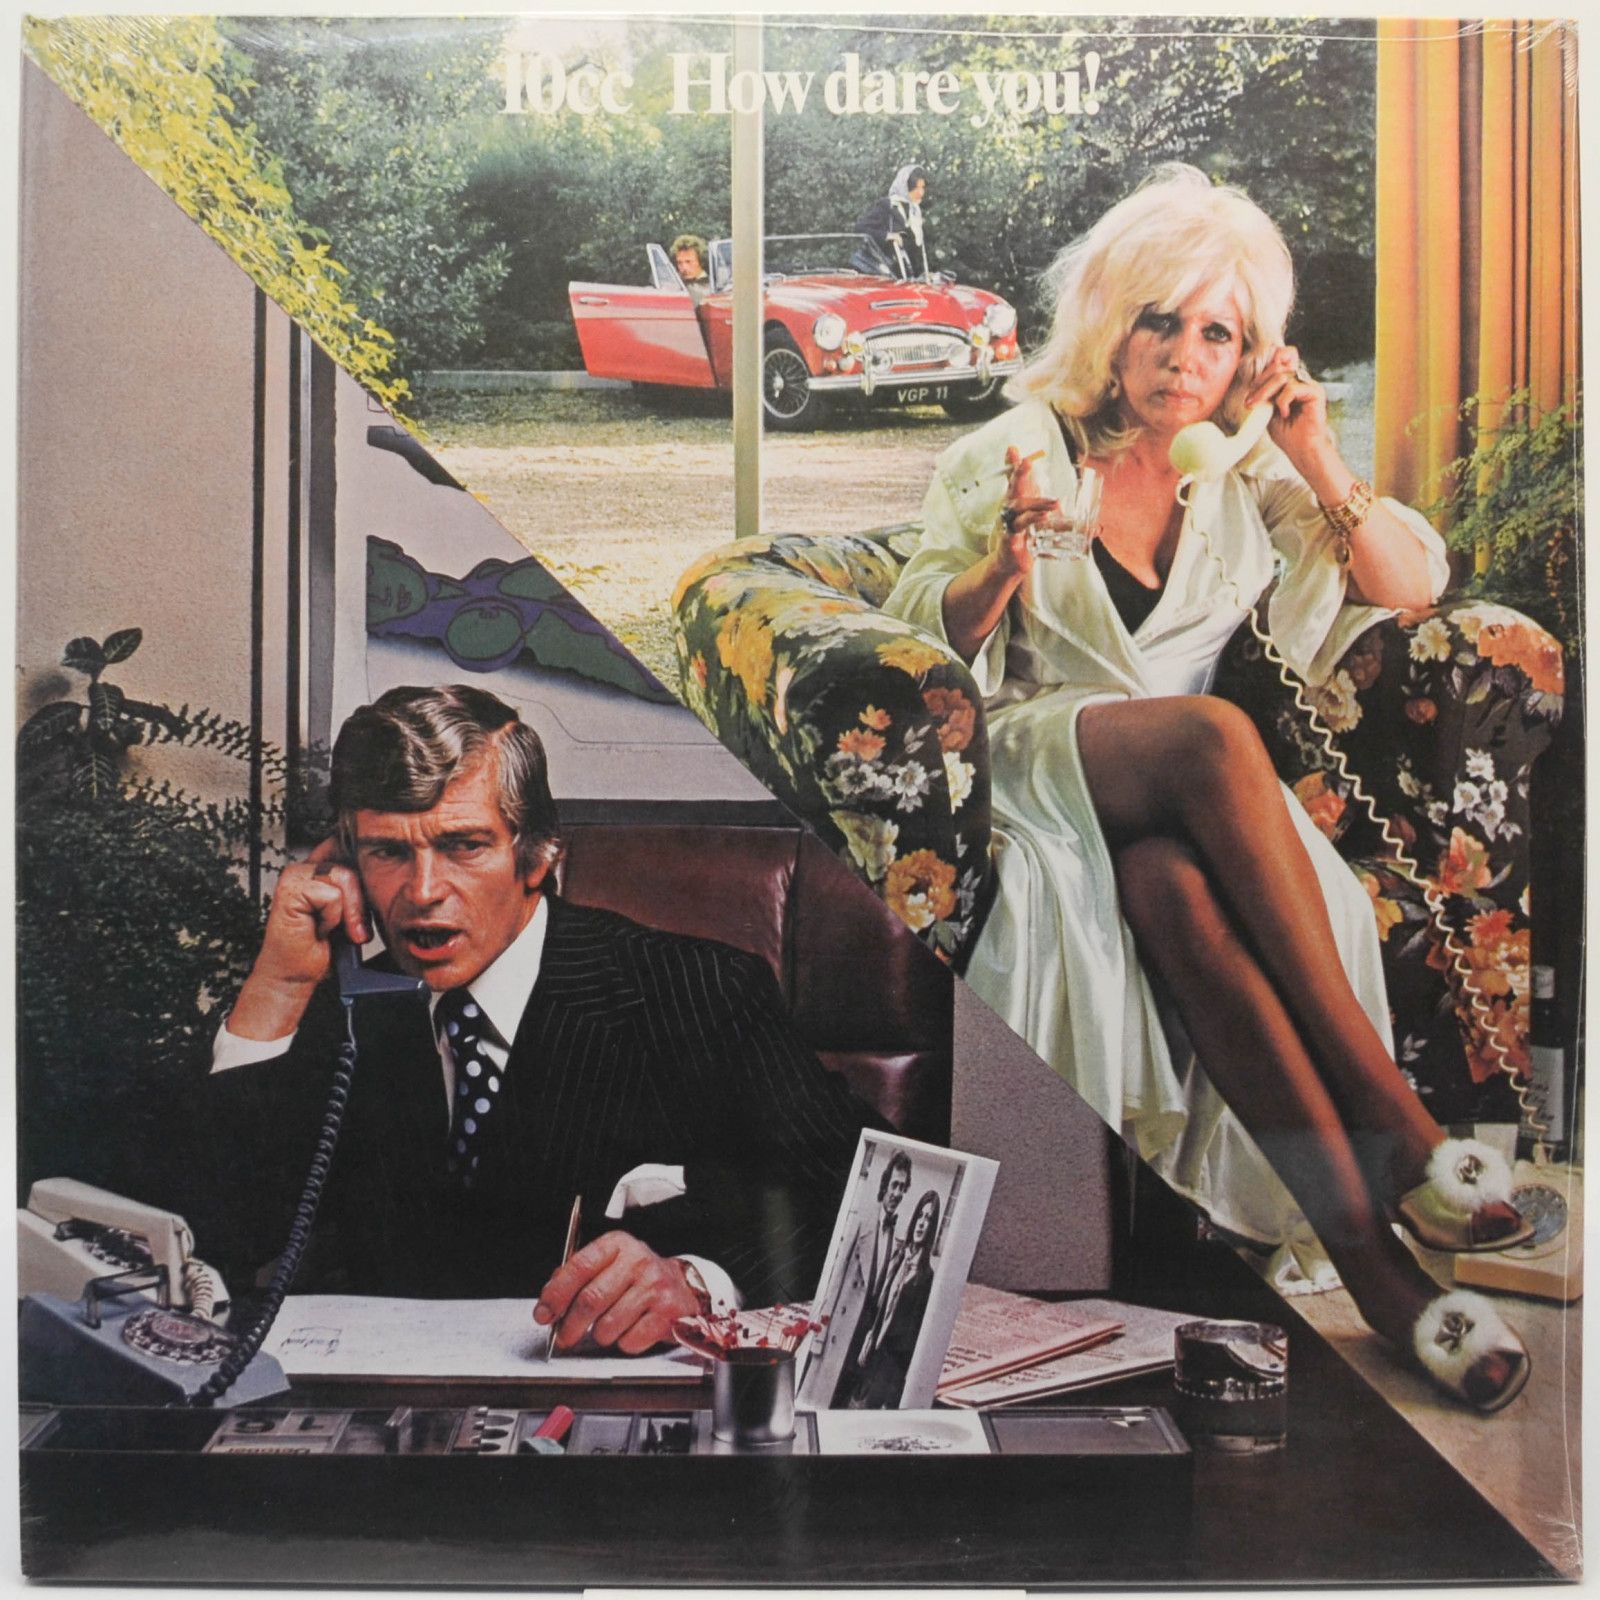 10cc — How Dare You! (UK), 1975